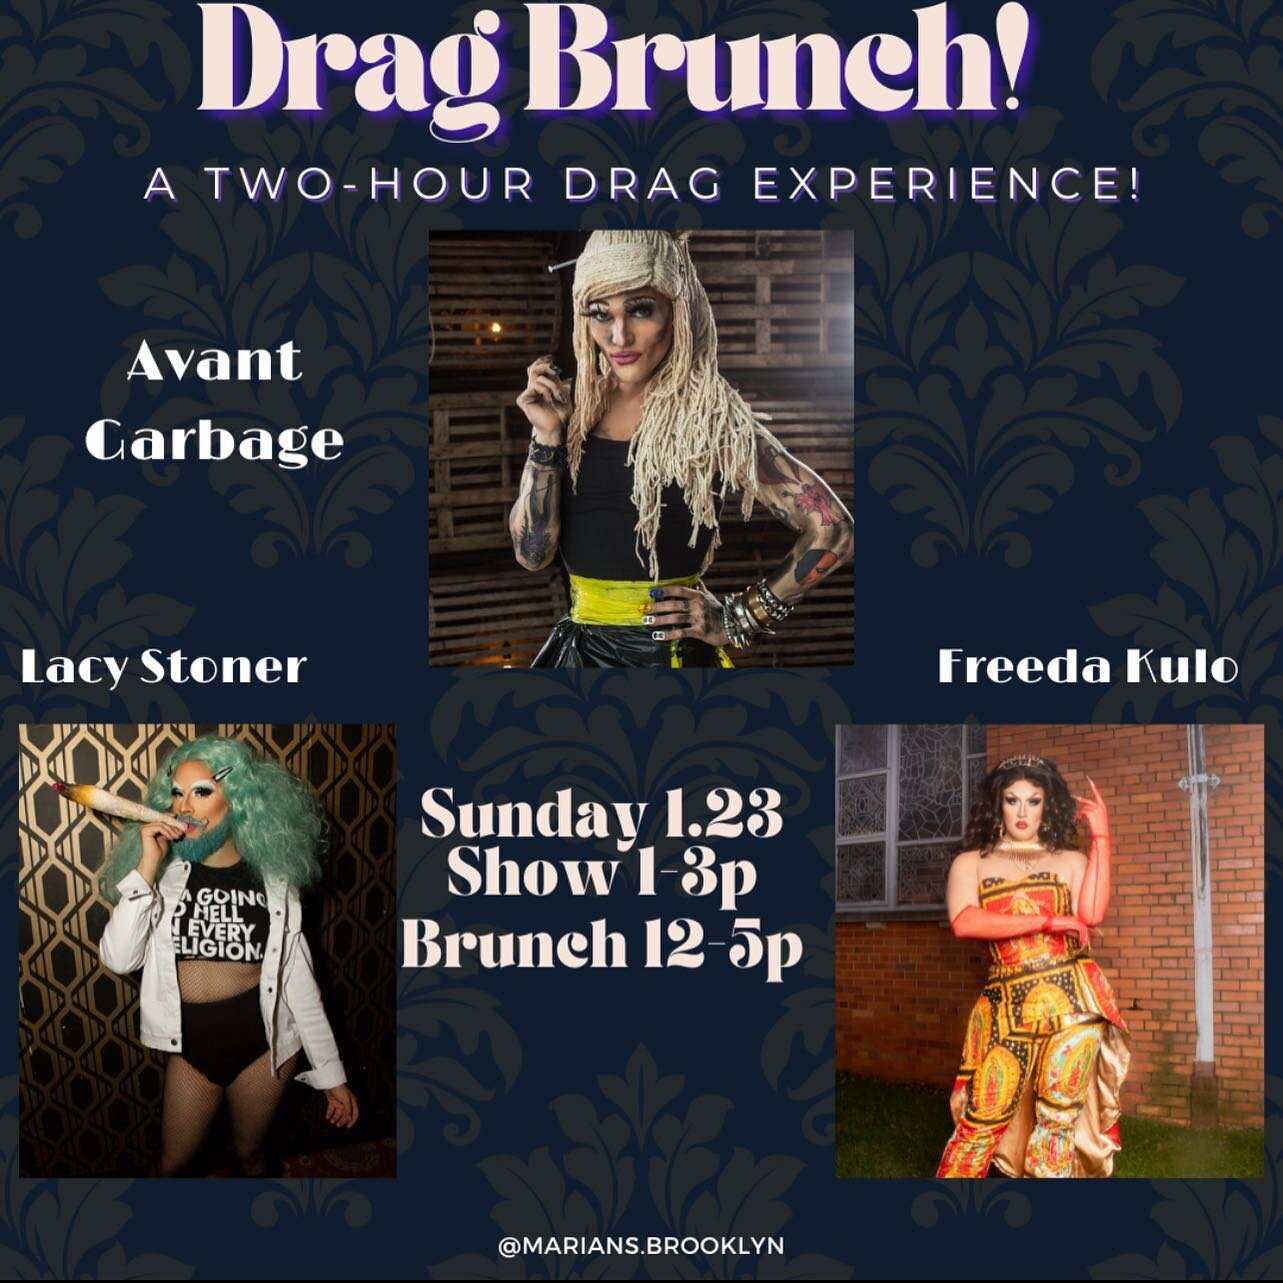 This Sunday, our drag brunch is back!!! We have the lovely @theonlytrashqueen @thelacystoner &amp; @freedakulo. If you have never been to a drag brunch, I promise you you are missing out! 
&bull;
&bull;
&bull;
&bull;
&bull;
&bull;
&bull;
&bull;
&bull